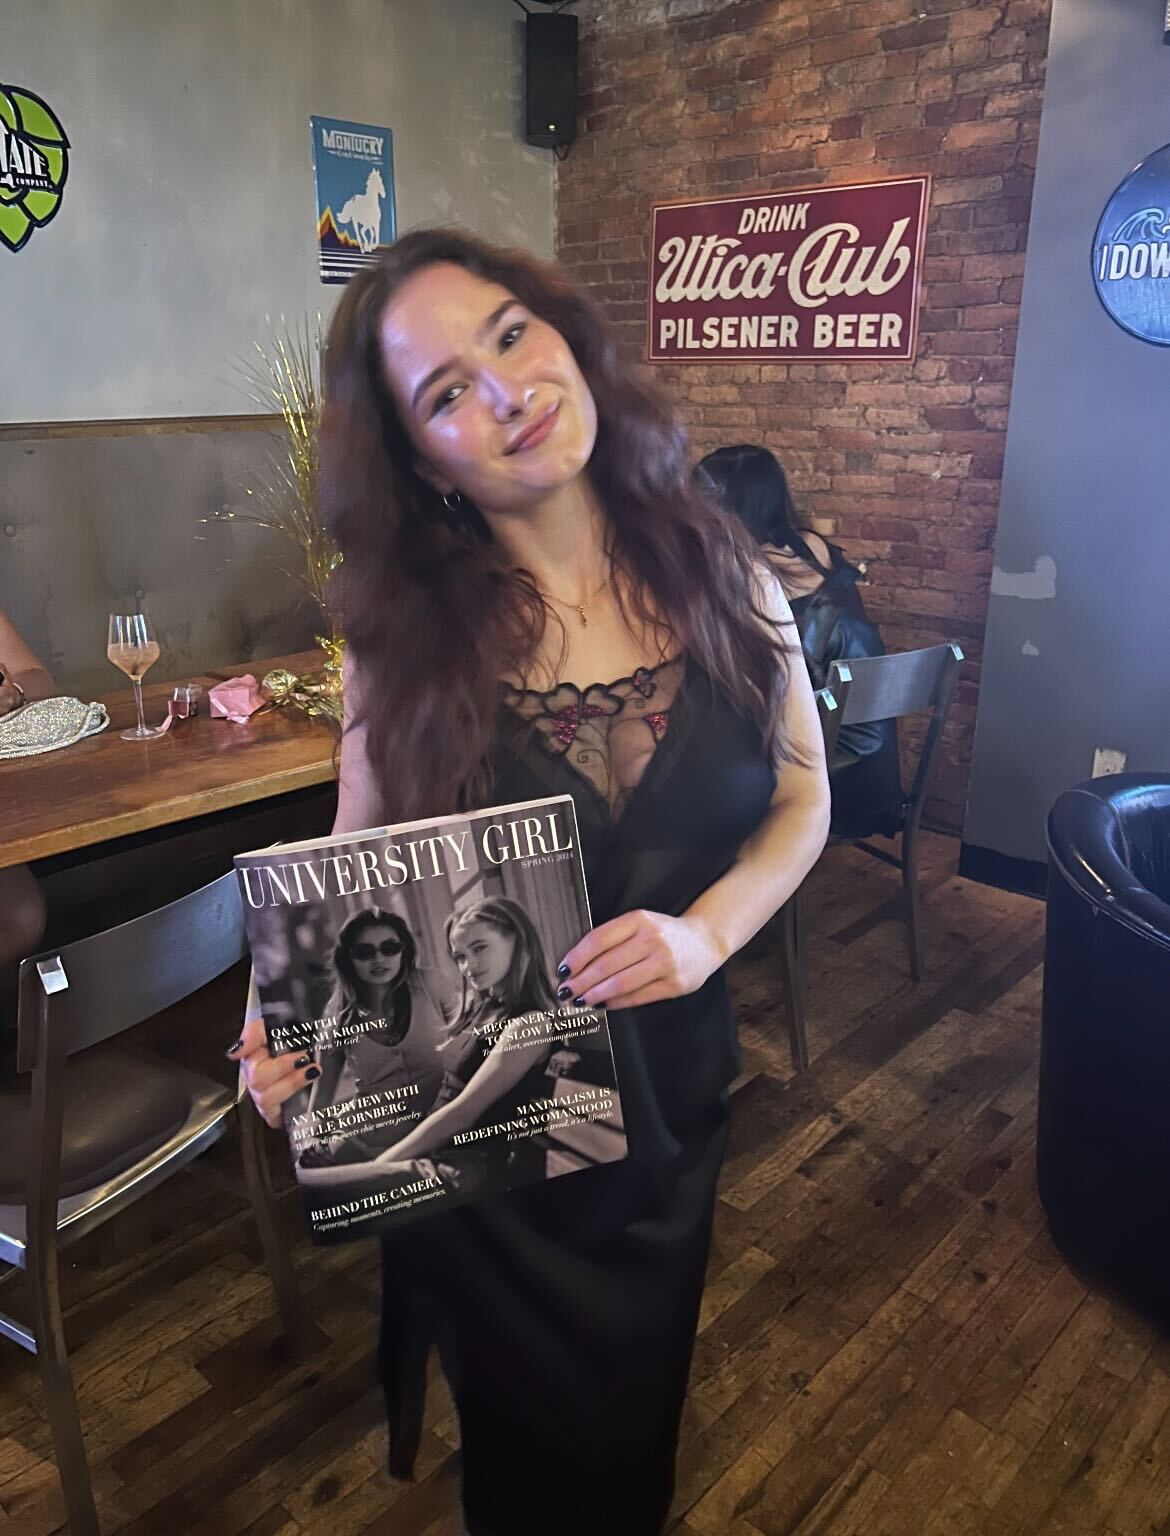 a person in a black dress stands holding a magazine